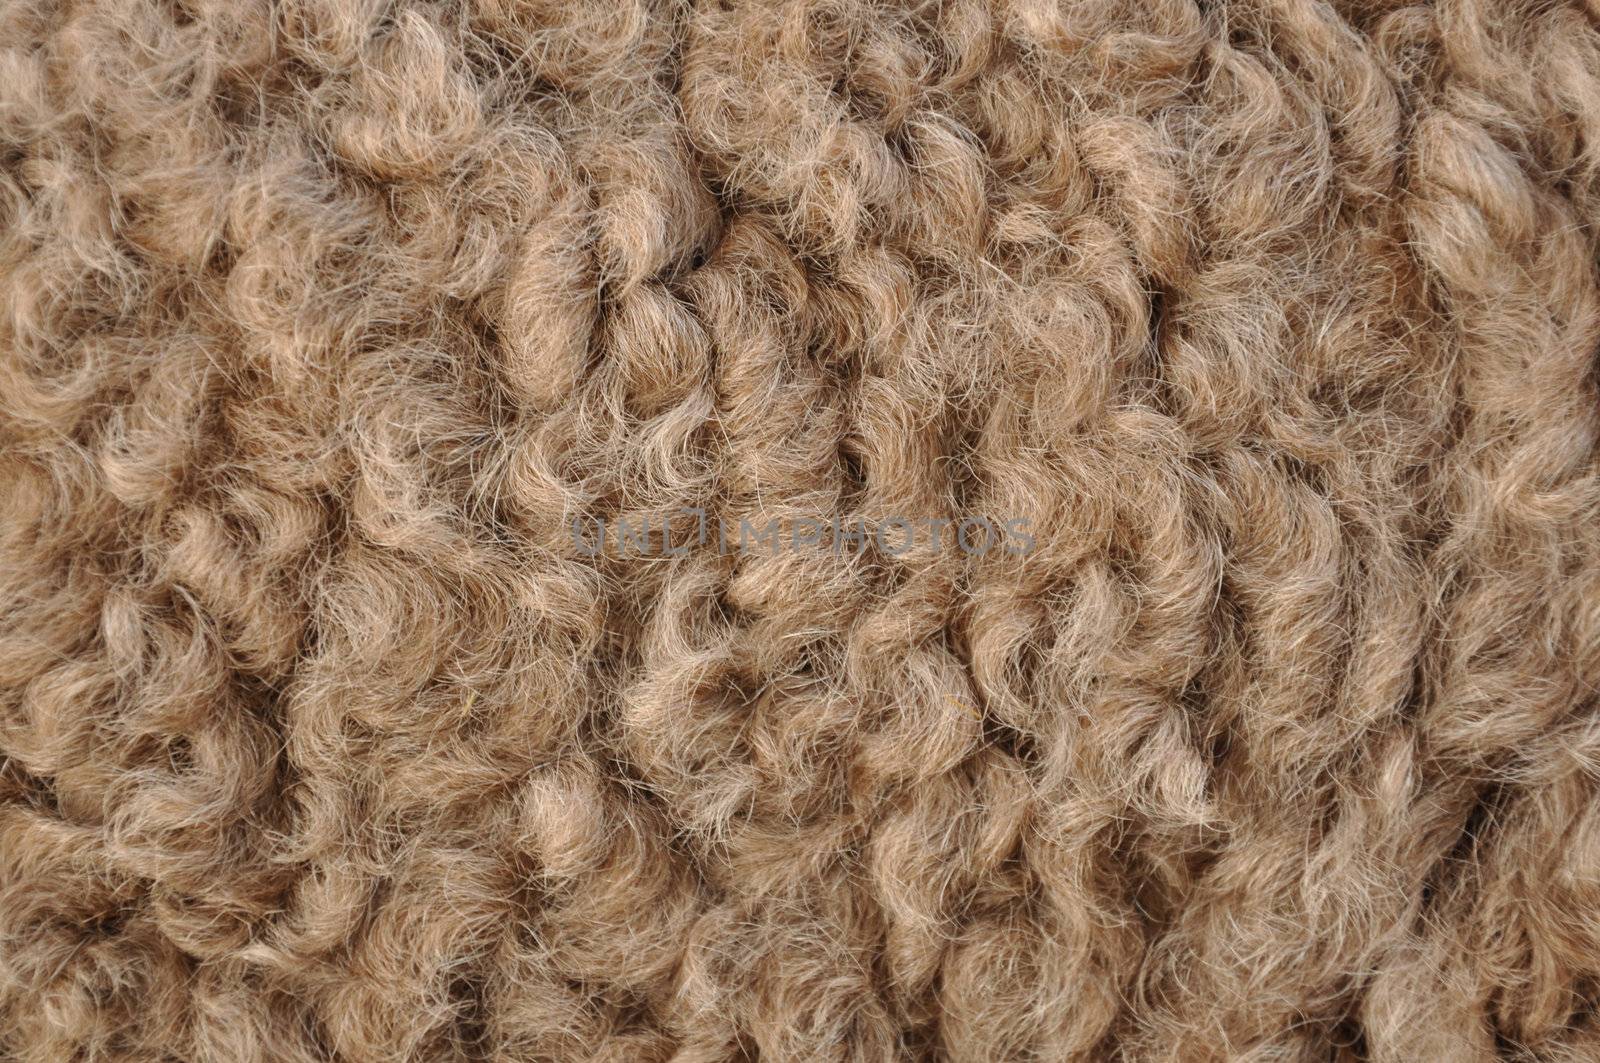 Camel hair is, variously, the hair of a camel; a type of cloth made from camel hair; or a substitute for authentic camel hair; and is classified as a specialty hair fibre.